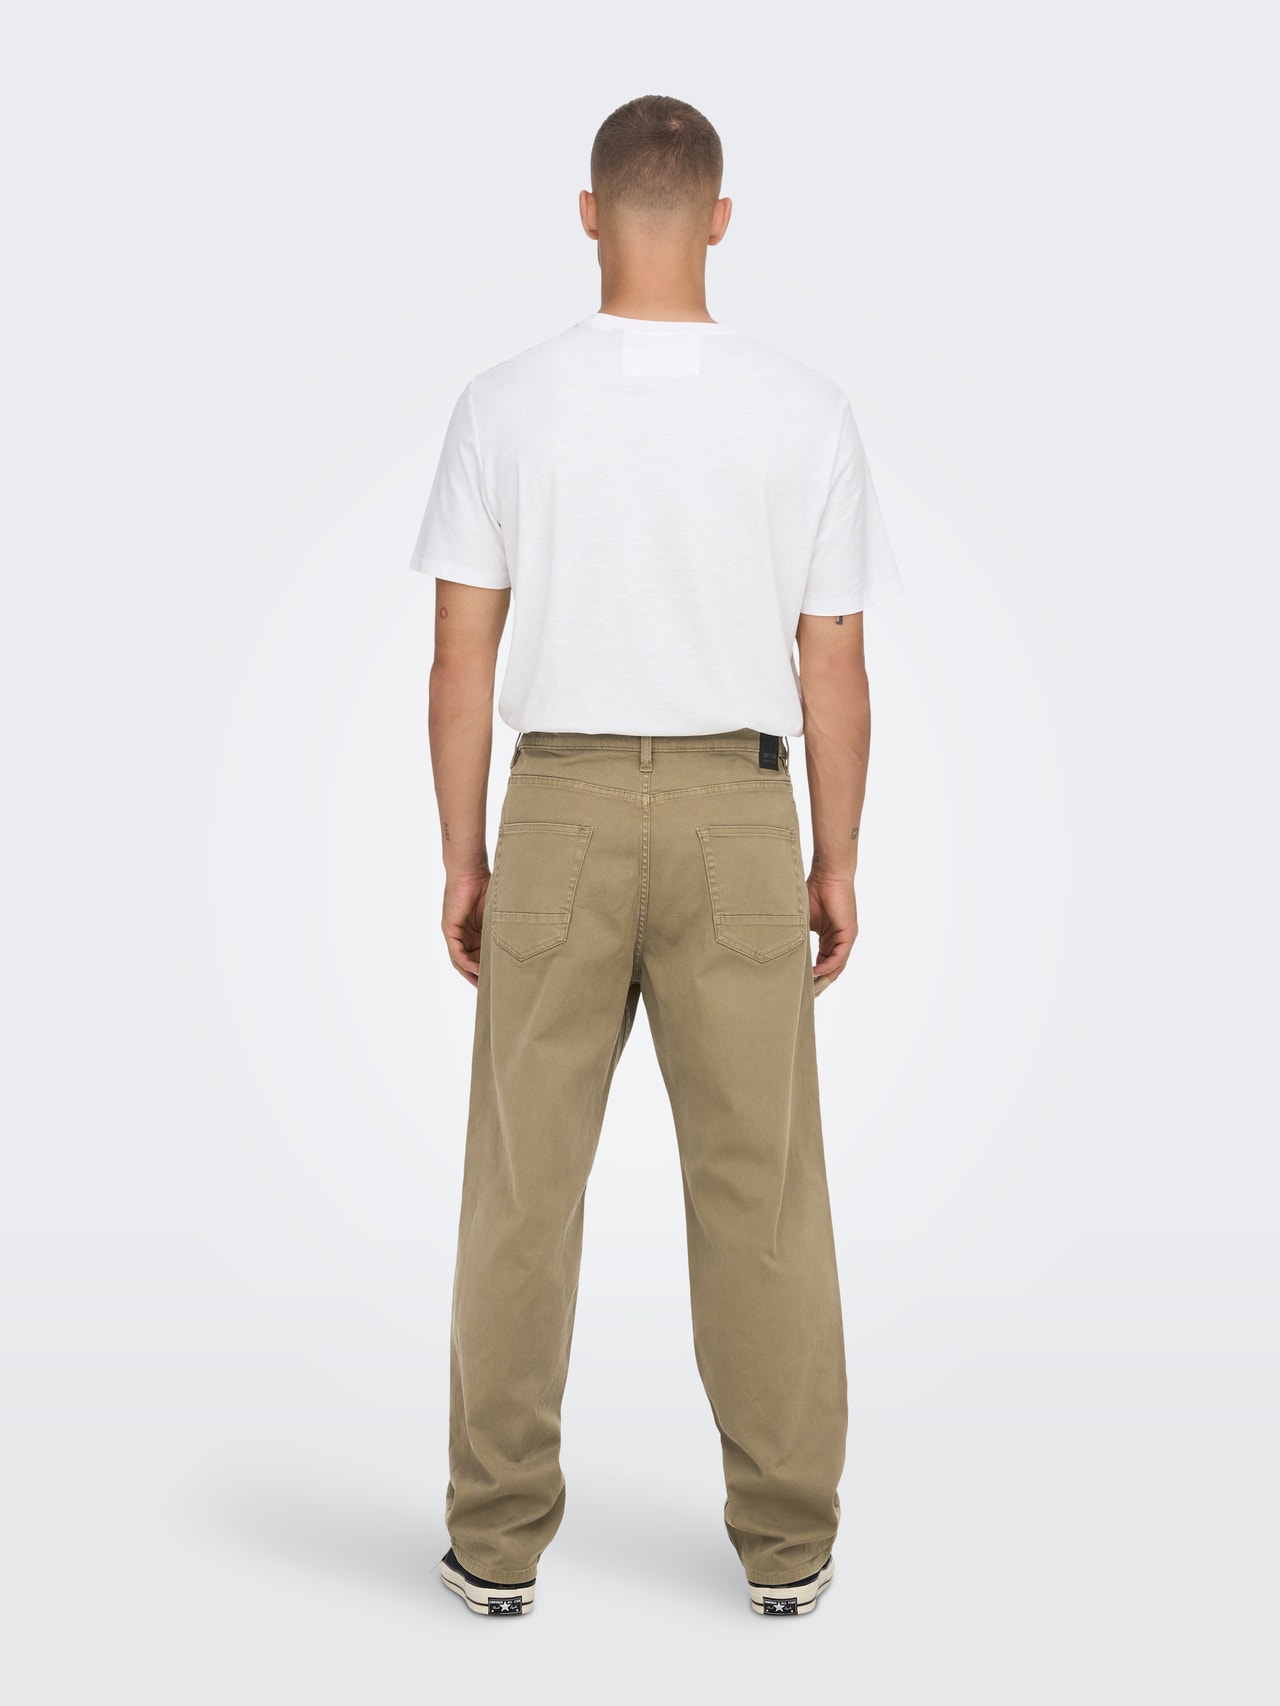 ONLY & SONS ONSEDGE LOOSE 3511 PANT -Caribou - 22023511